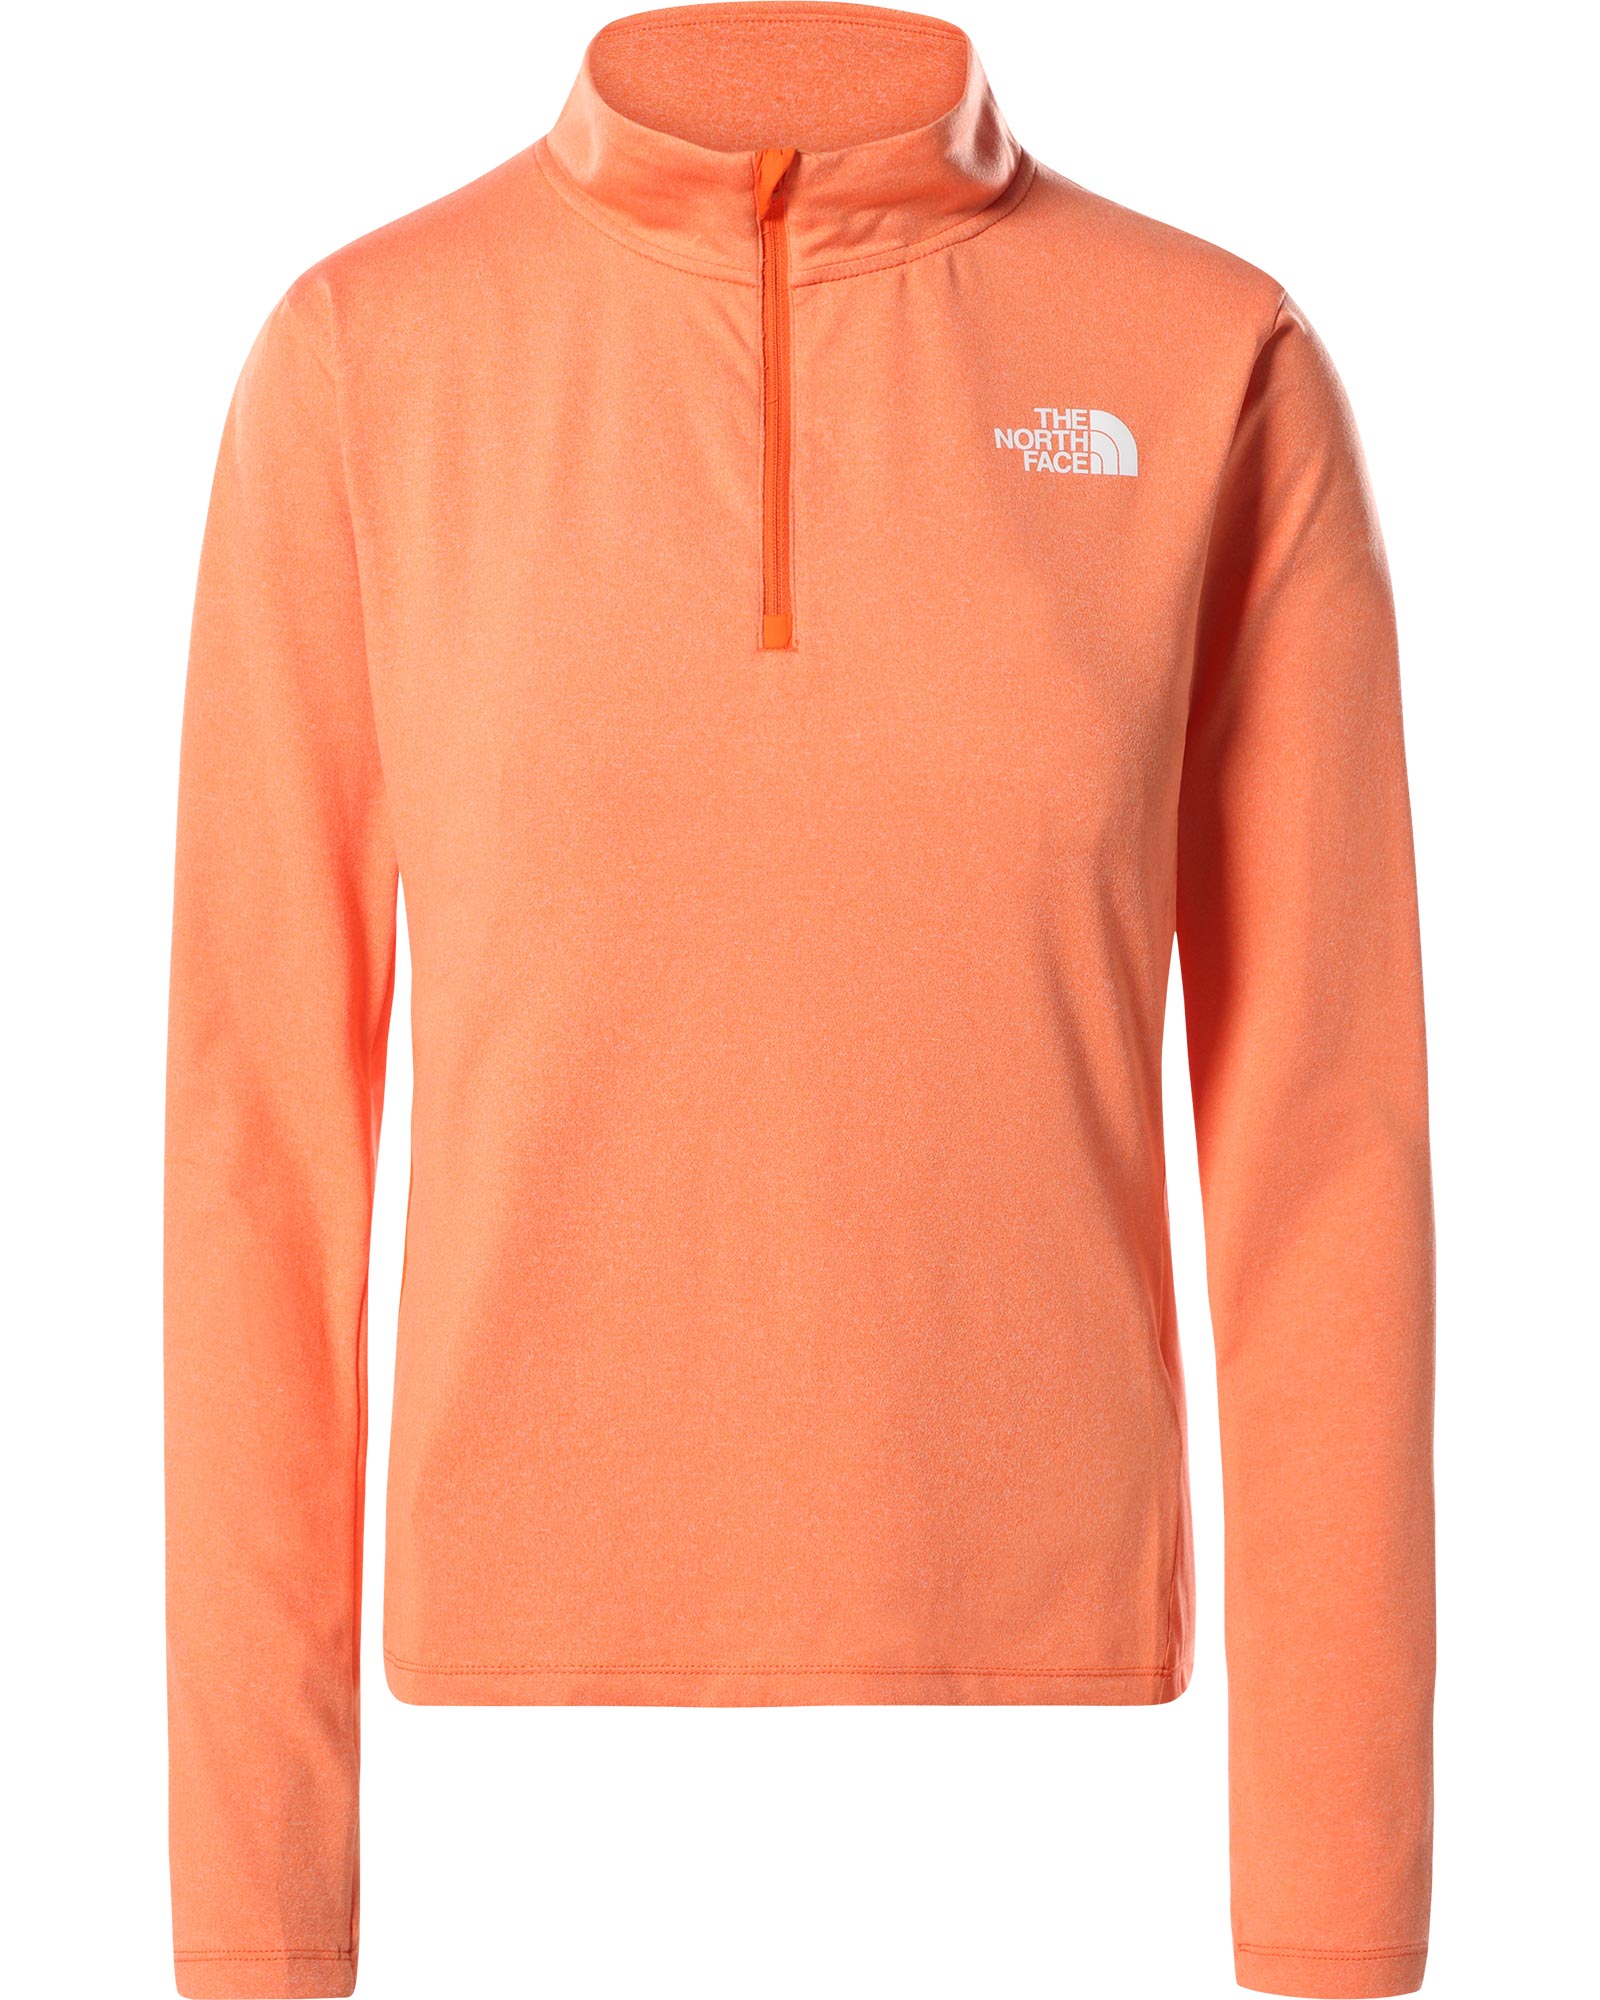 The North Face Riseway Womens 1/2 Zip Top